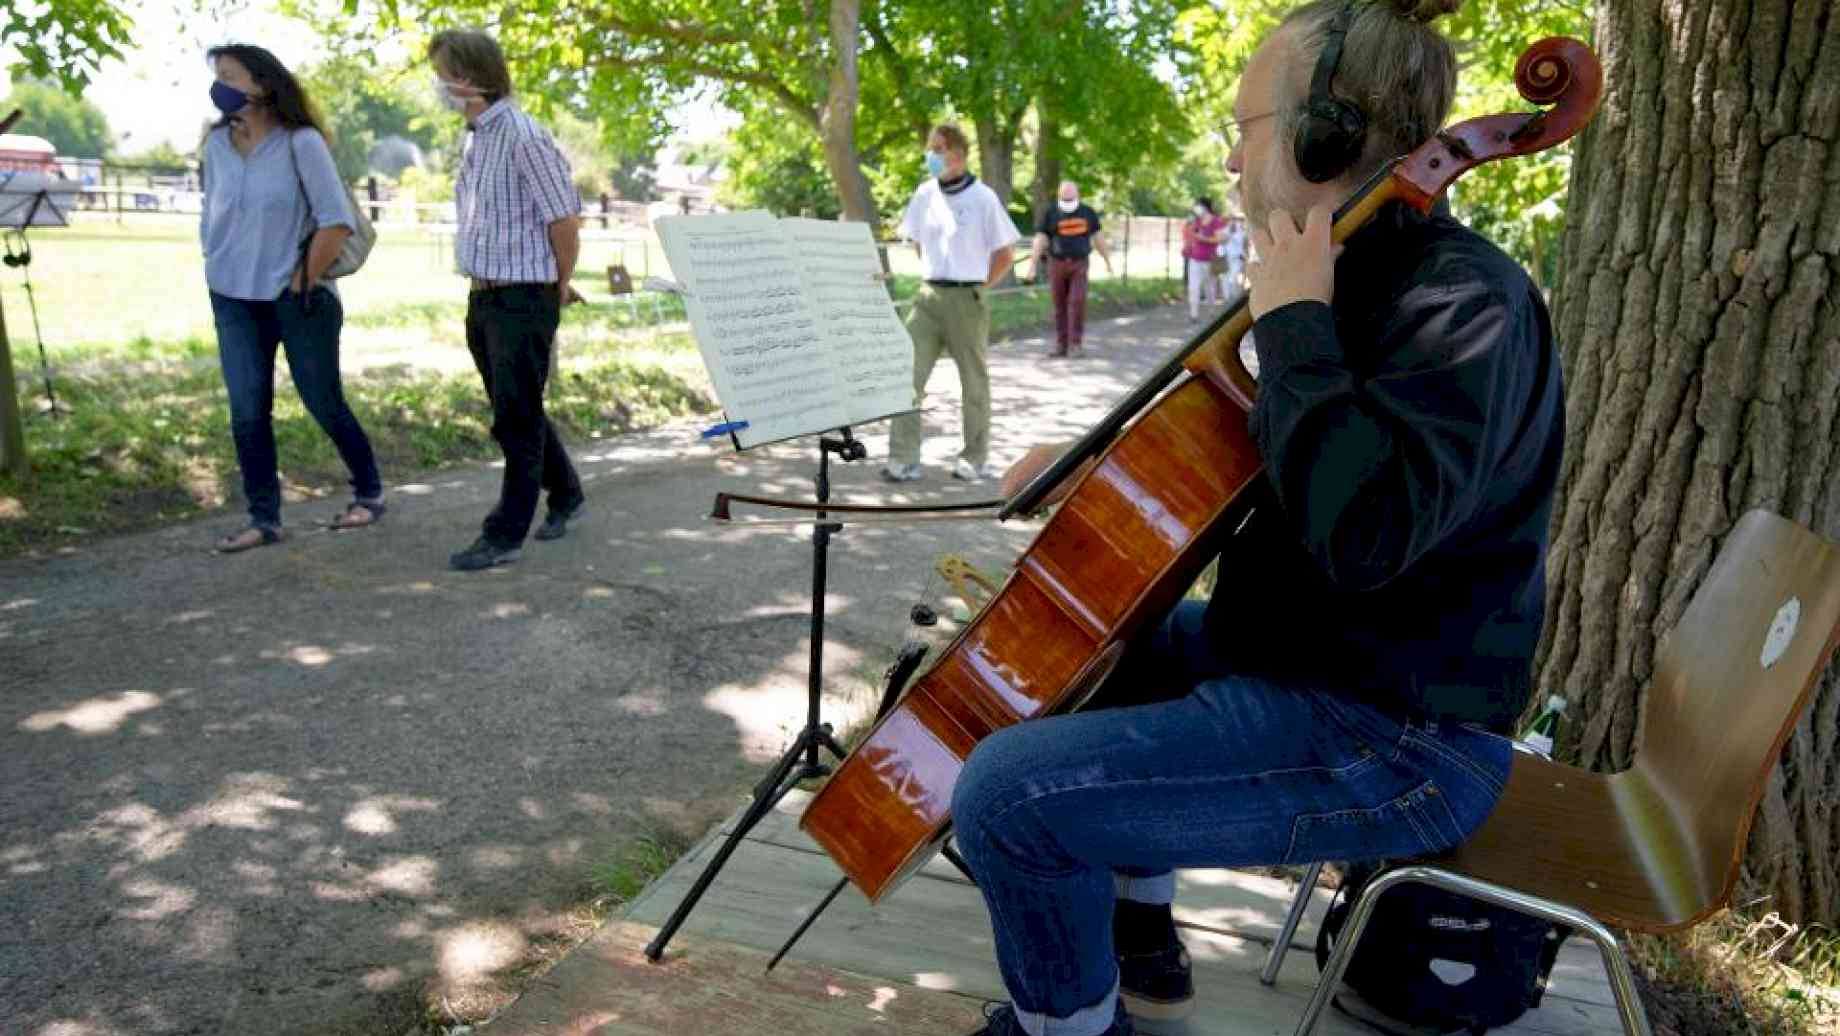 Musicians making it work during Covid-19: a (reality) check-in. Photo Credit: George Howard, Forbes, May 31, 2020. Retrieved from https://www.forbes.com/sites/georgehoward/2020/05/31/musicians-making-it-work-during-covid-19-a-reality-check-in/#1e88dba427c4